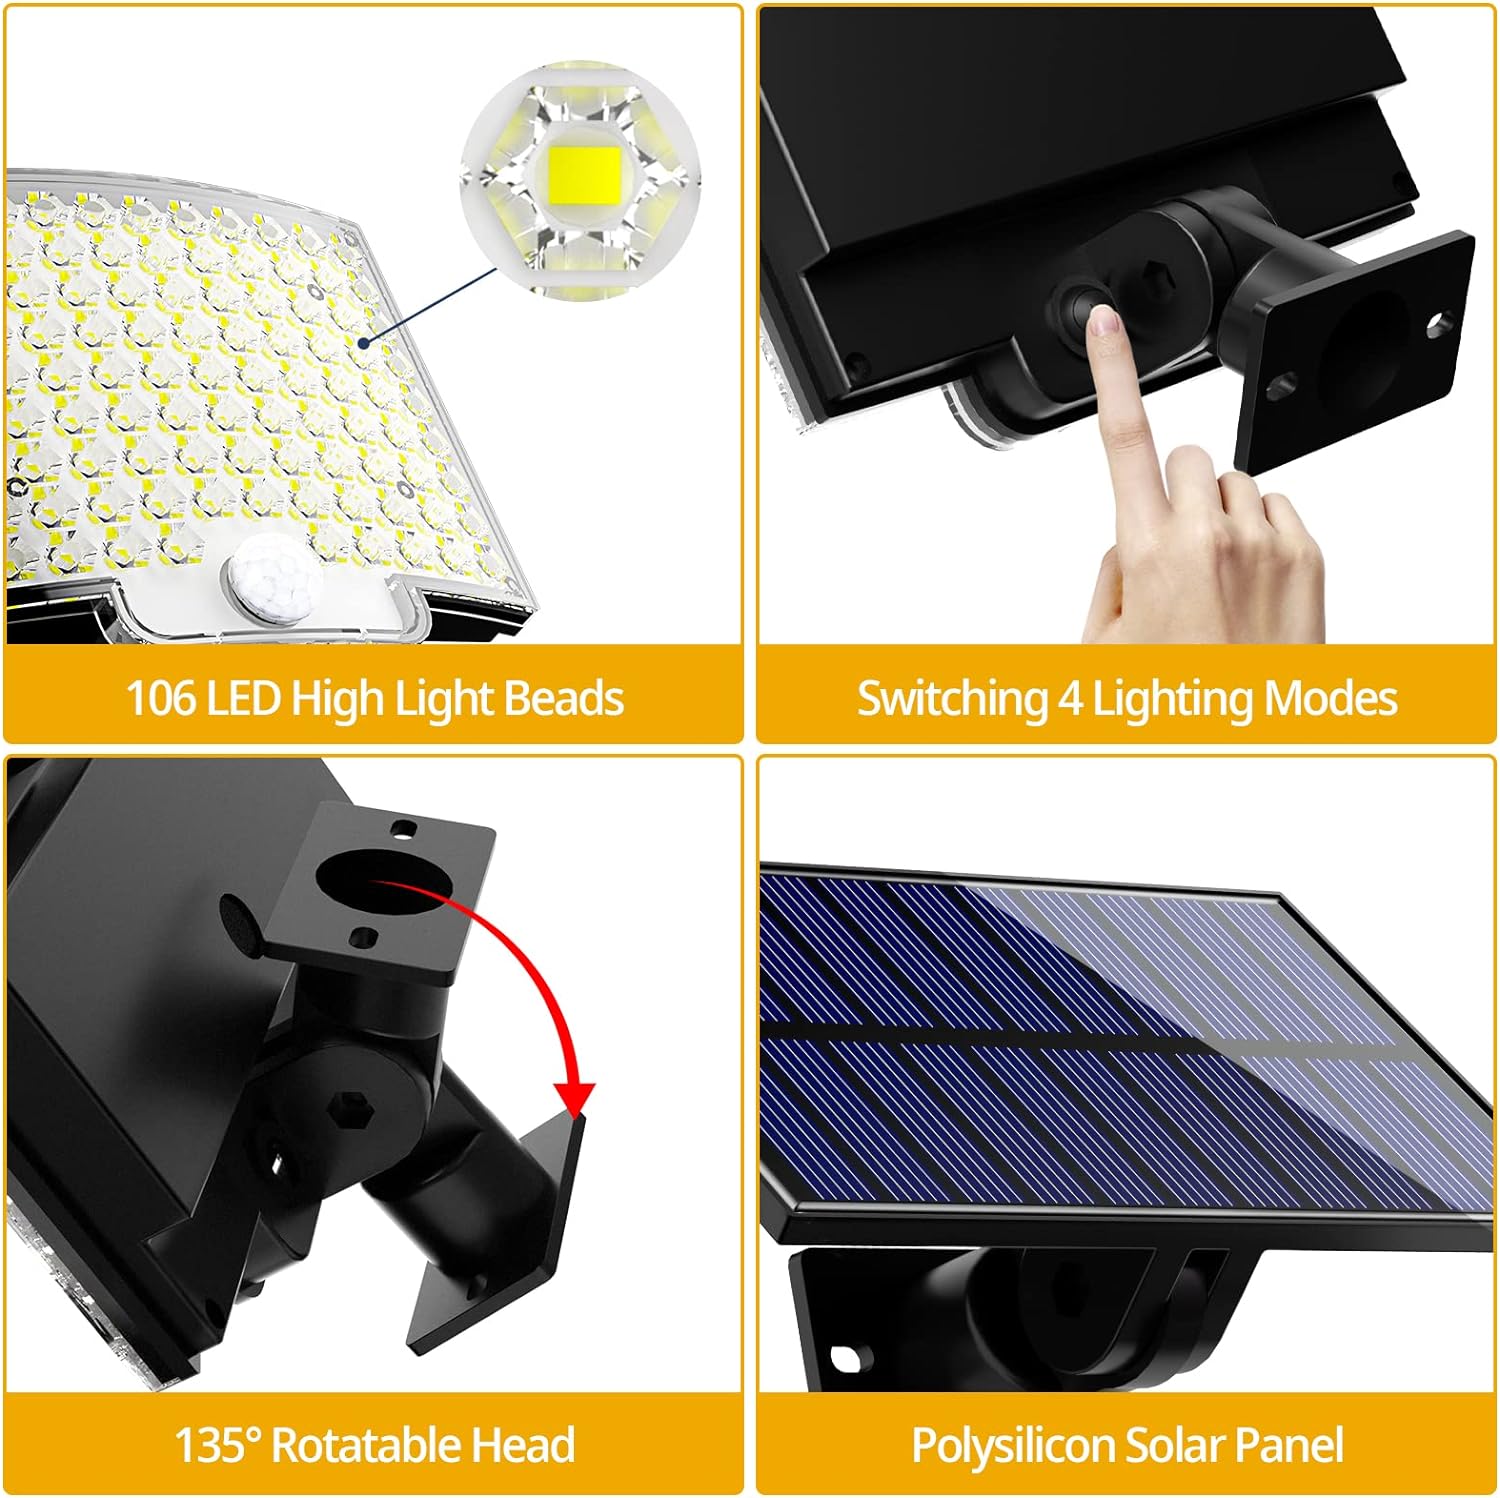 Generic Solar Lights Outdoor, 106 LED 3000LM Solar Powered Motion Sensor Flood Lights with Remote, Dusk to Dawn Led Solar Security Wall